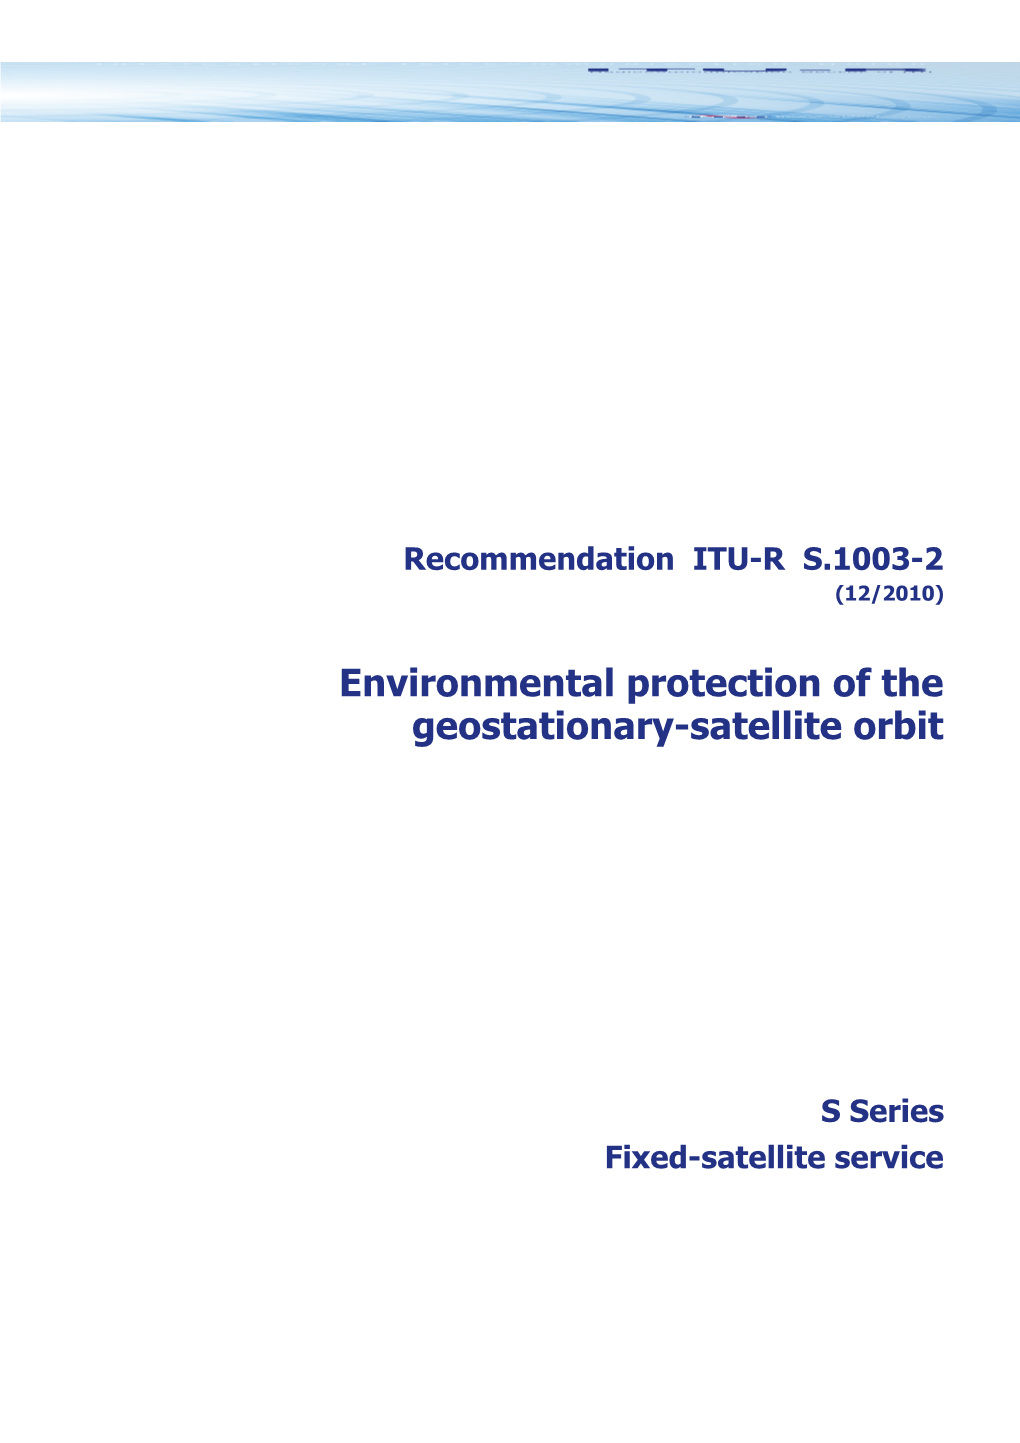 RECOMMENDATION ITU-R S.1003-2* - Environmental Protection of the Geostationary-Satellite Orbit